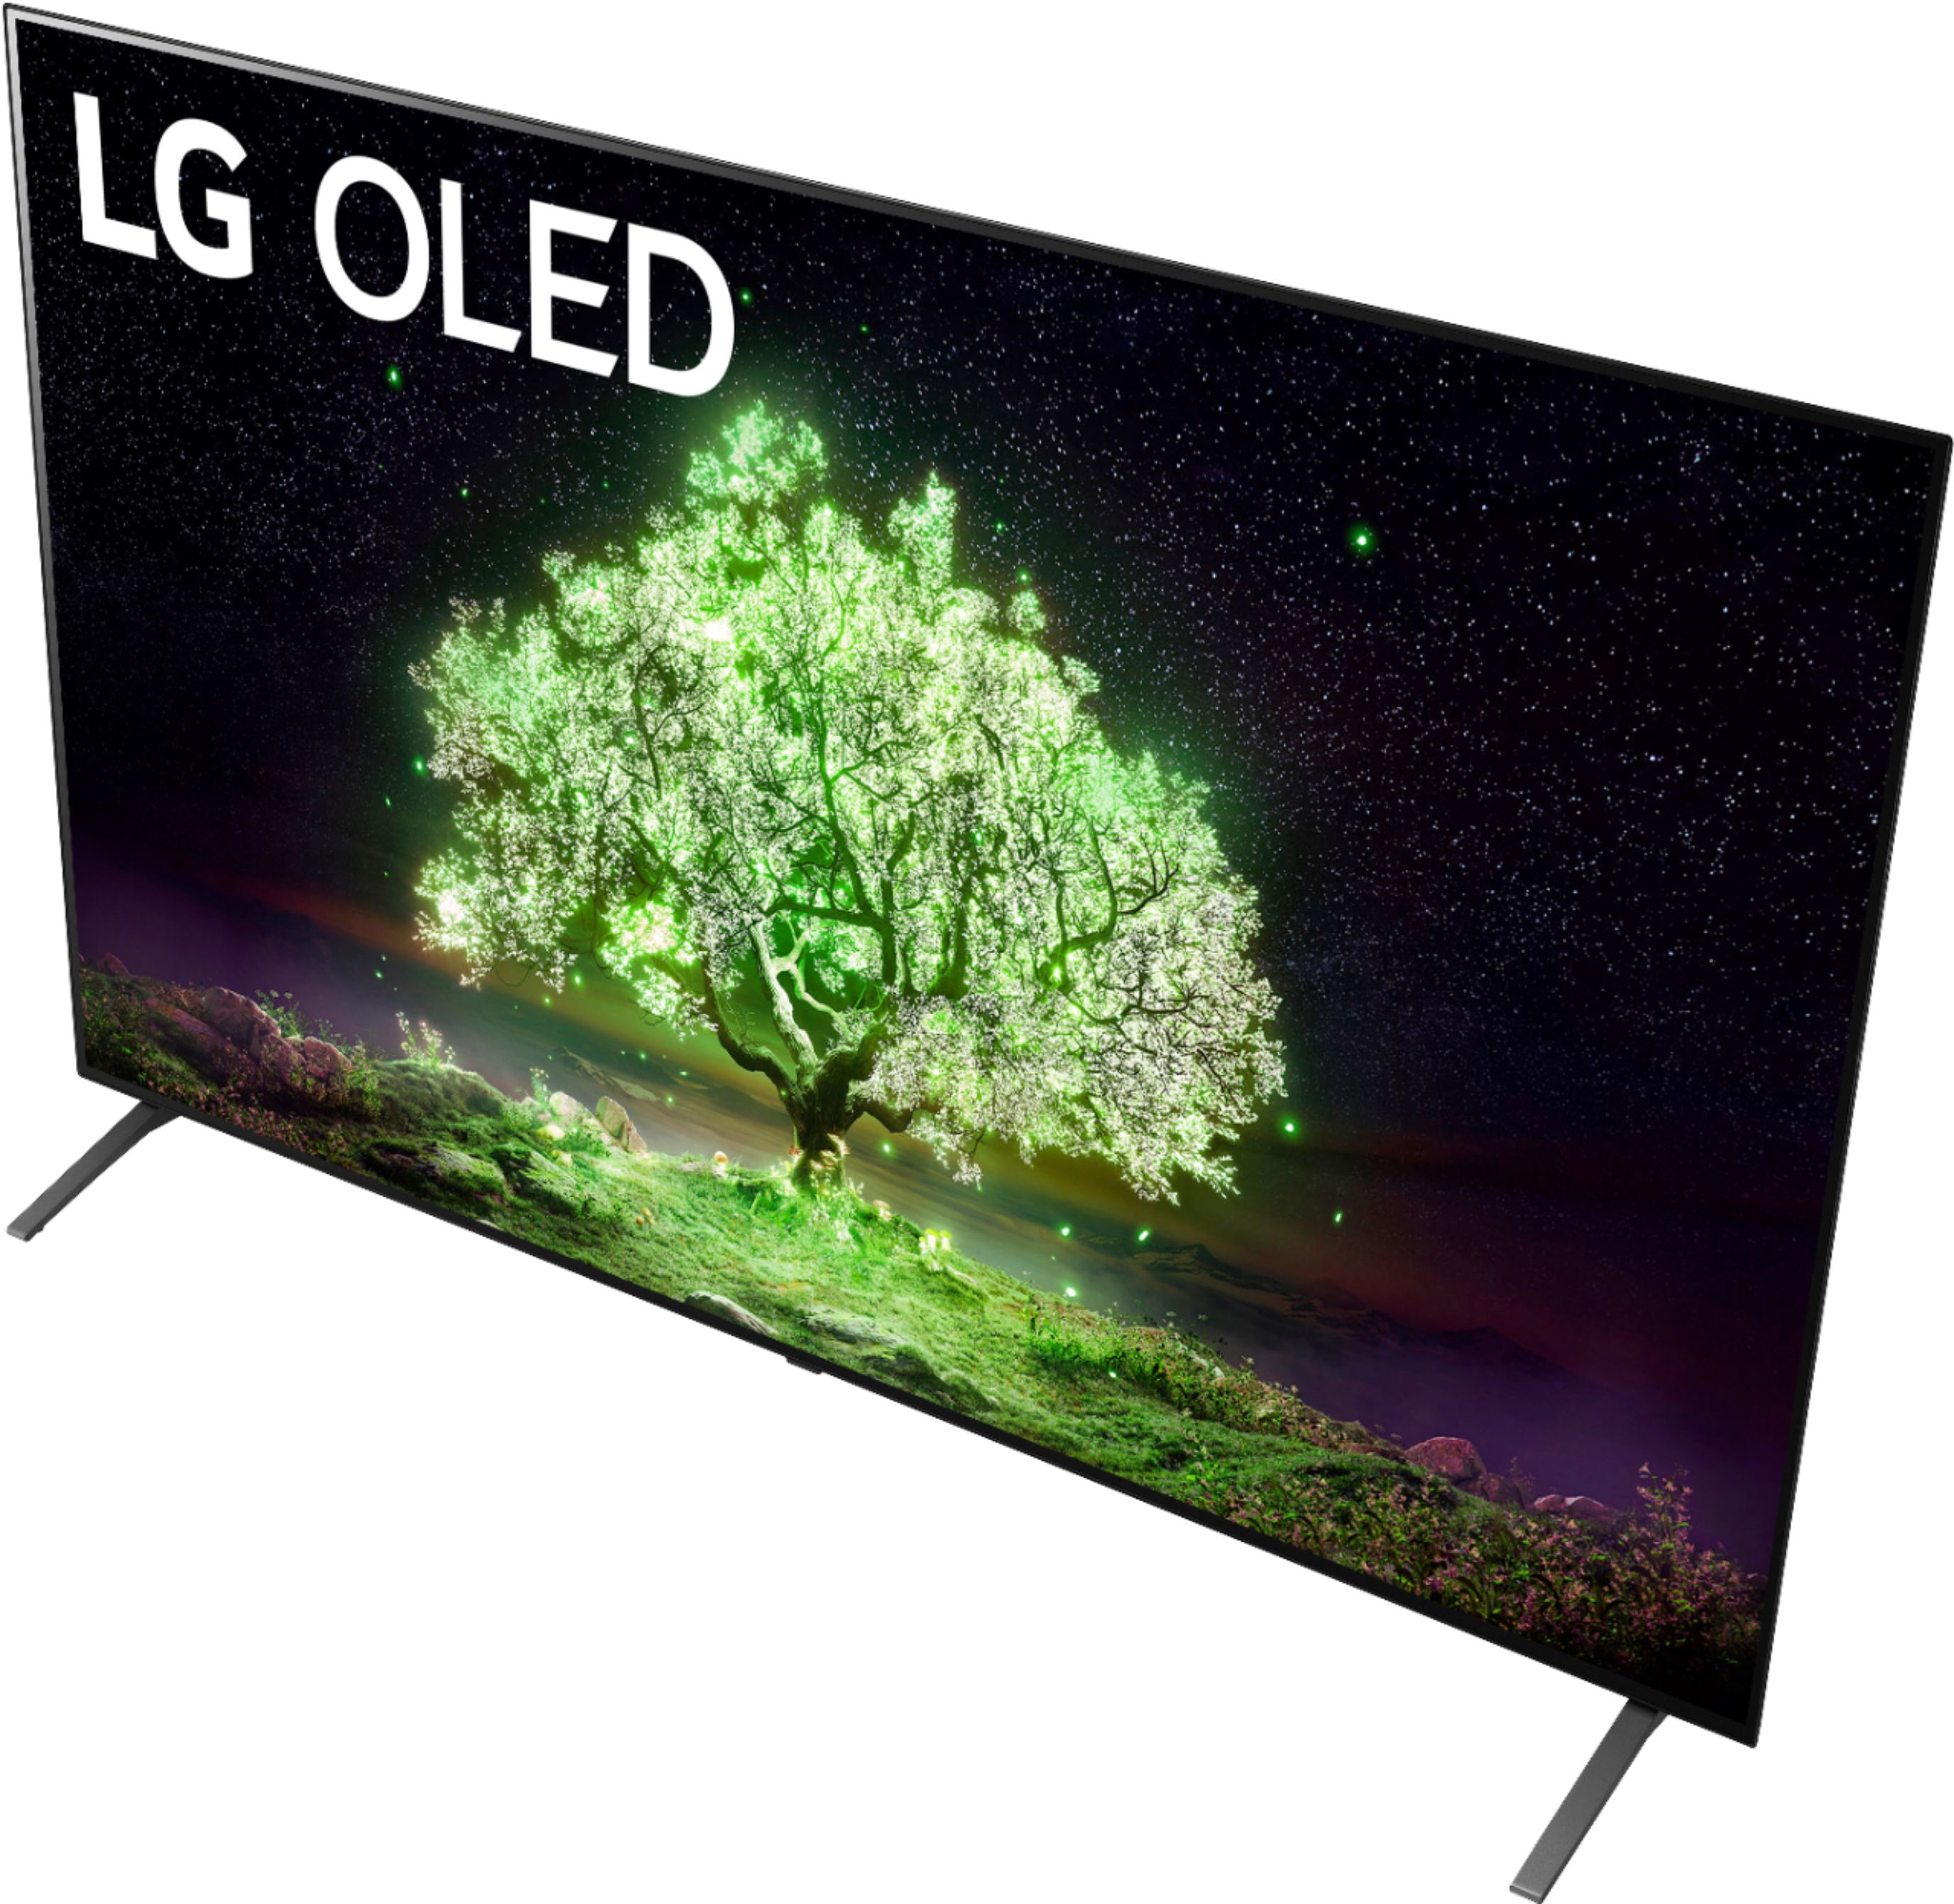 You Can Pick Up a Massive 77 LG 4K OLED Smart TV for Only $1800 - IGN